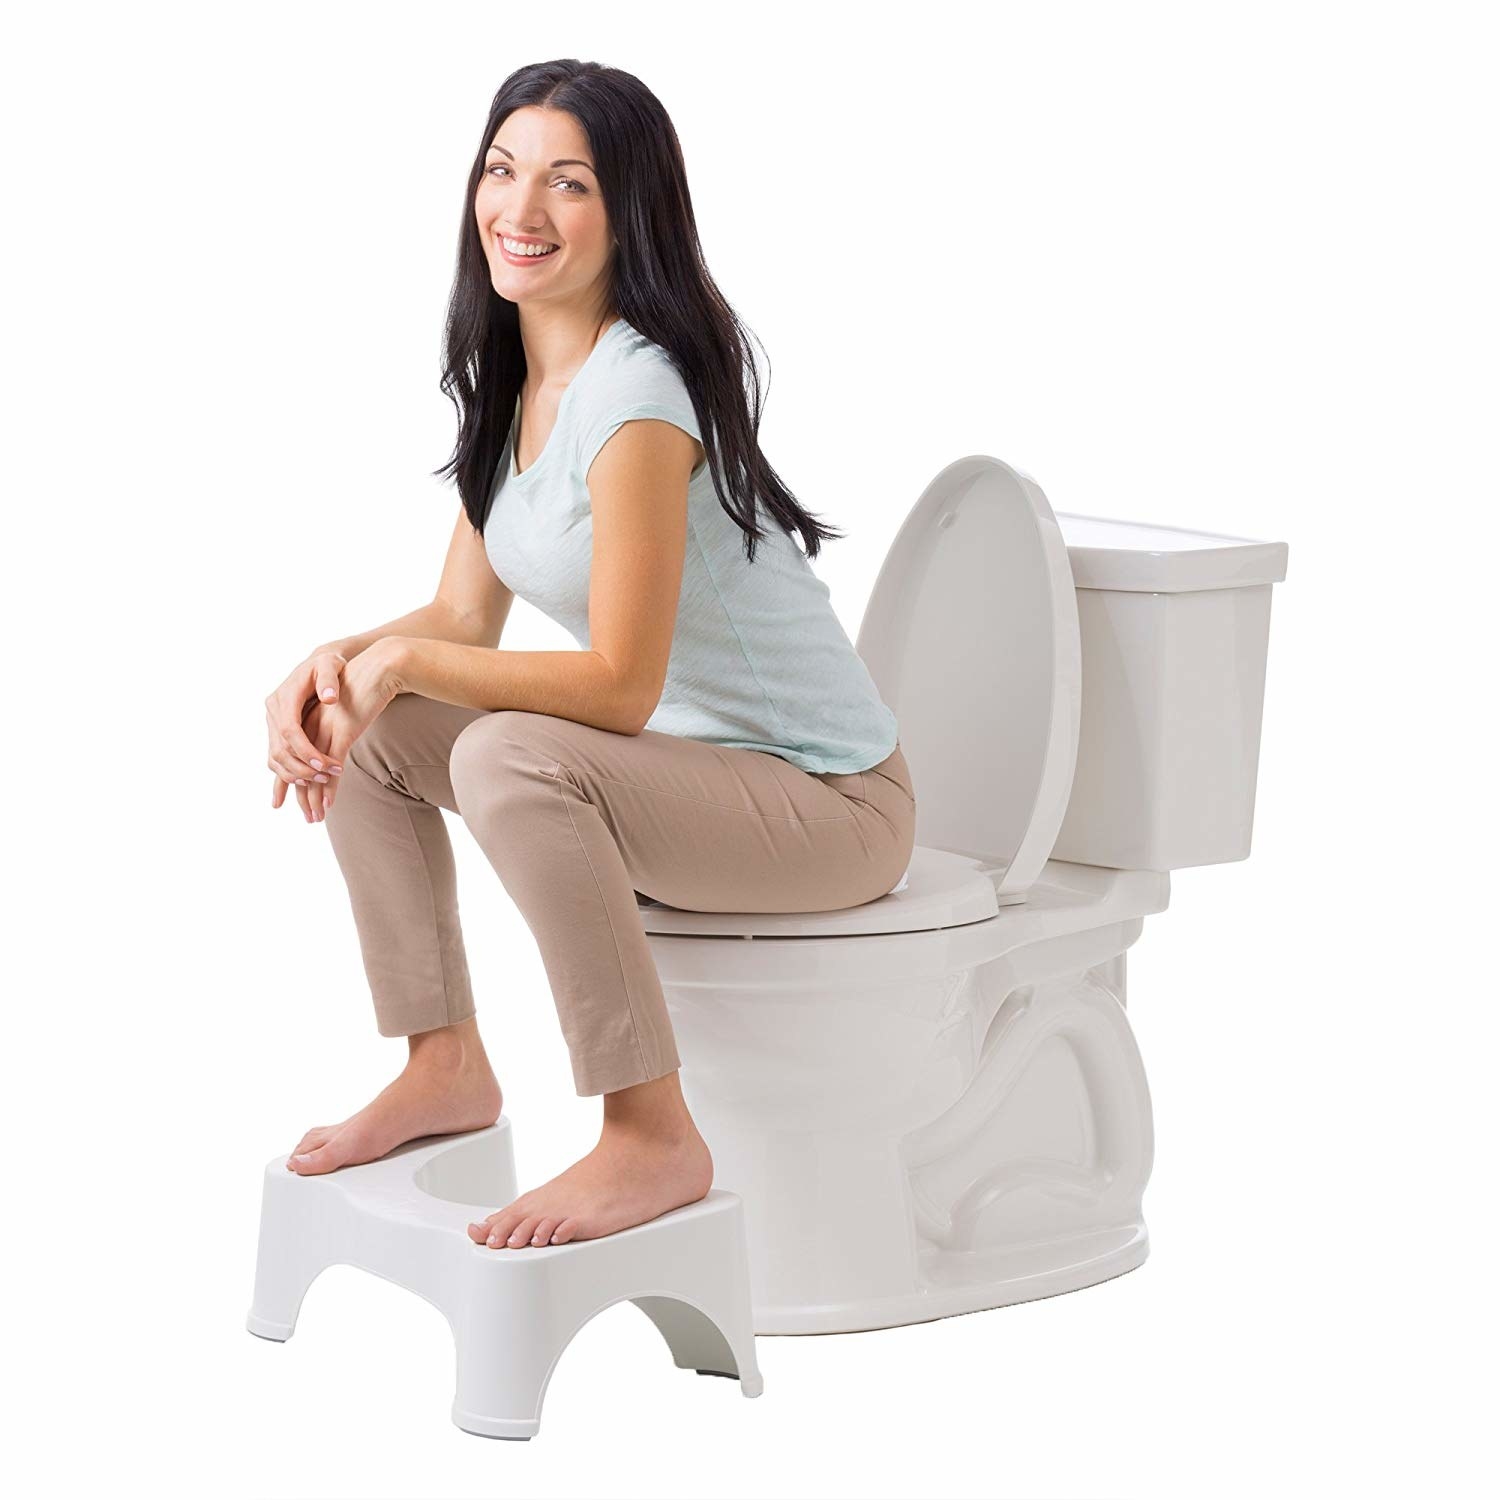 model sitting on a toilet with a white squatty potty under their feel